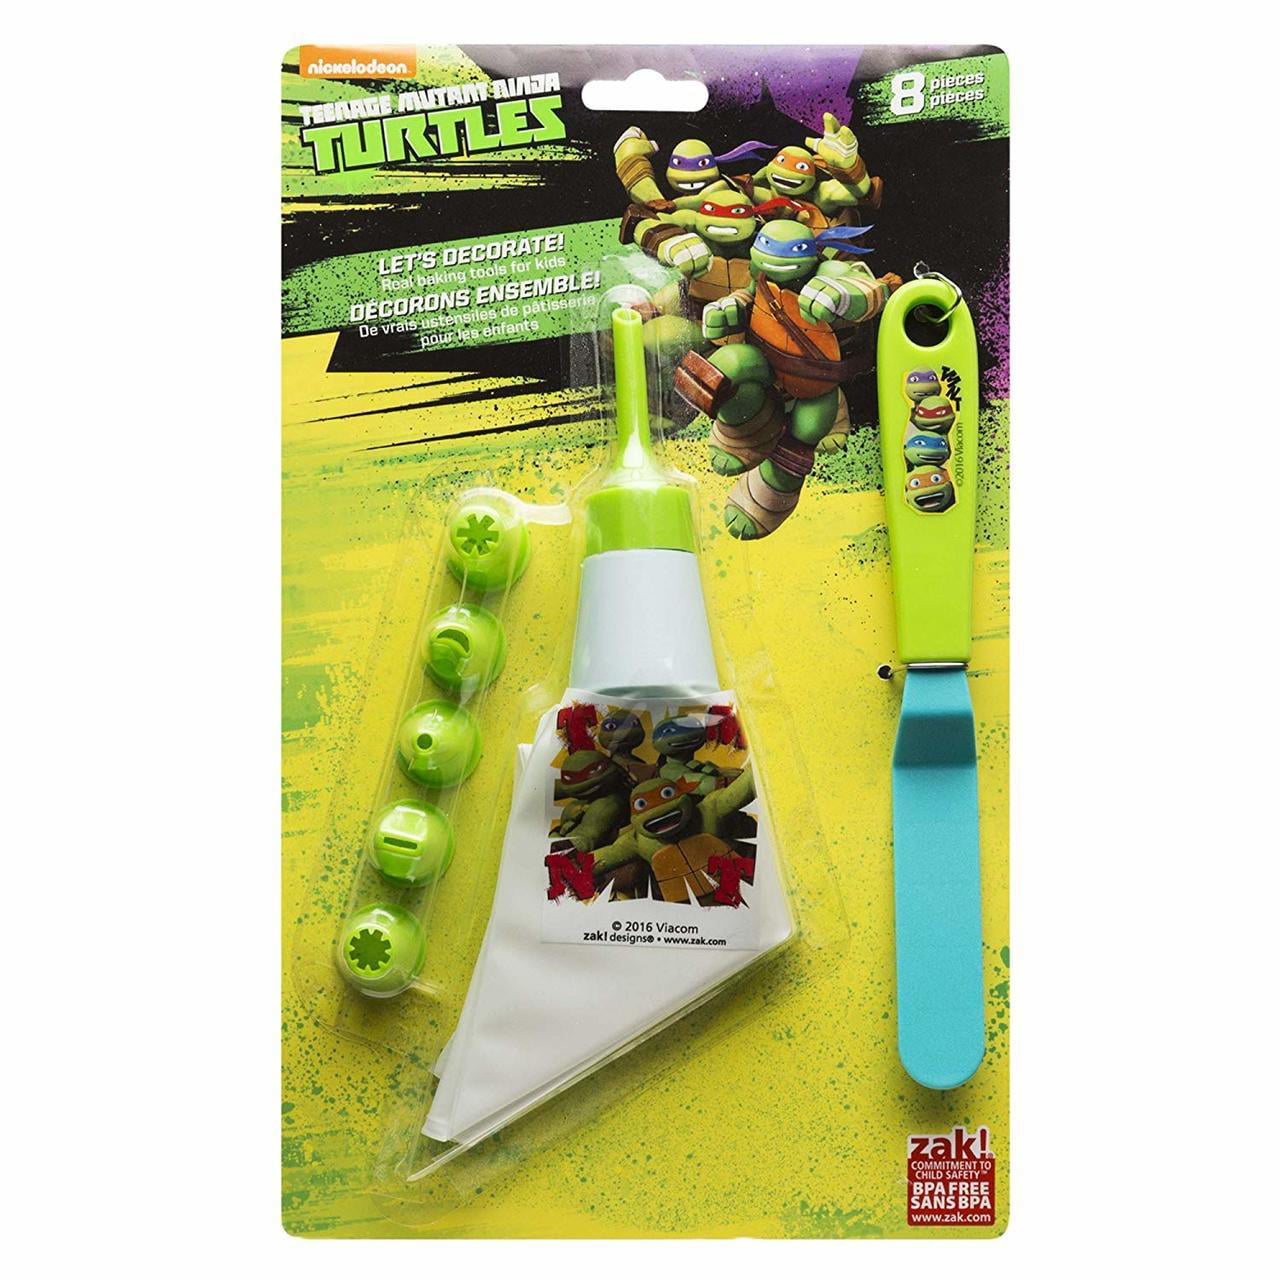 Ninja Turtles Zak Designs Lets Decorate Frosting Bag and 6 Tips for Cooking with Kids